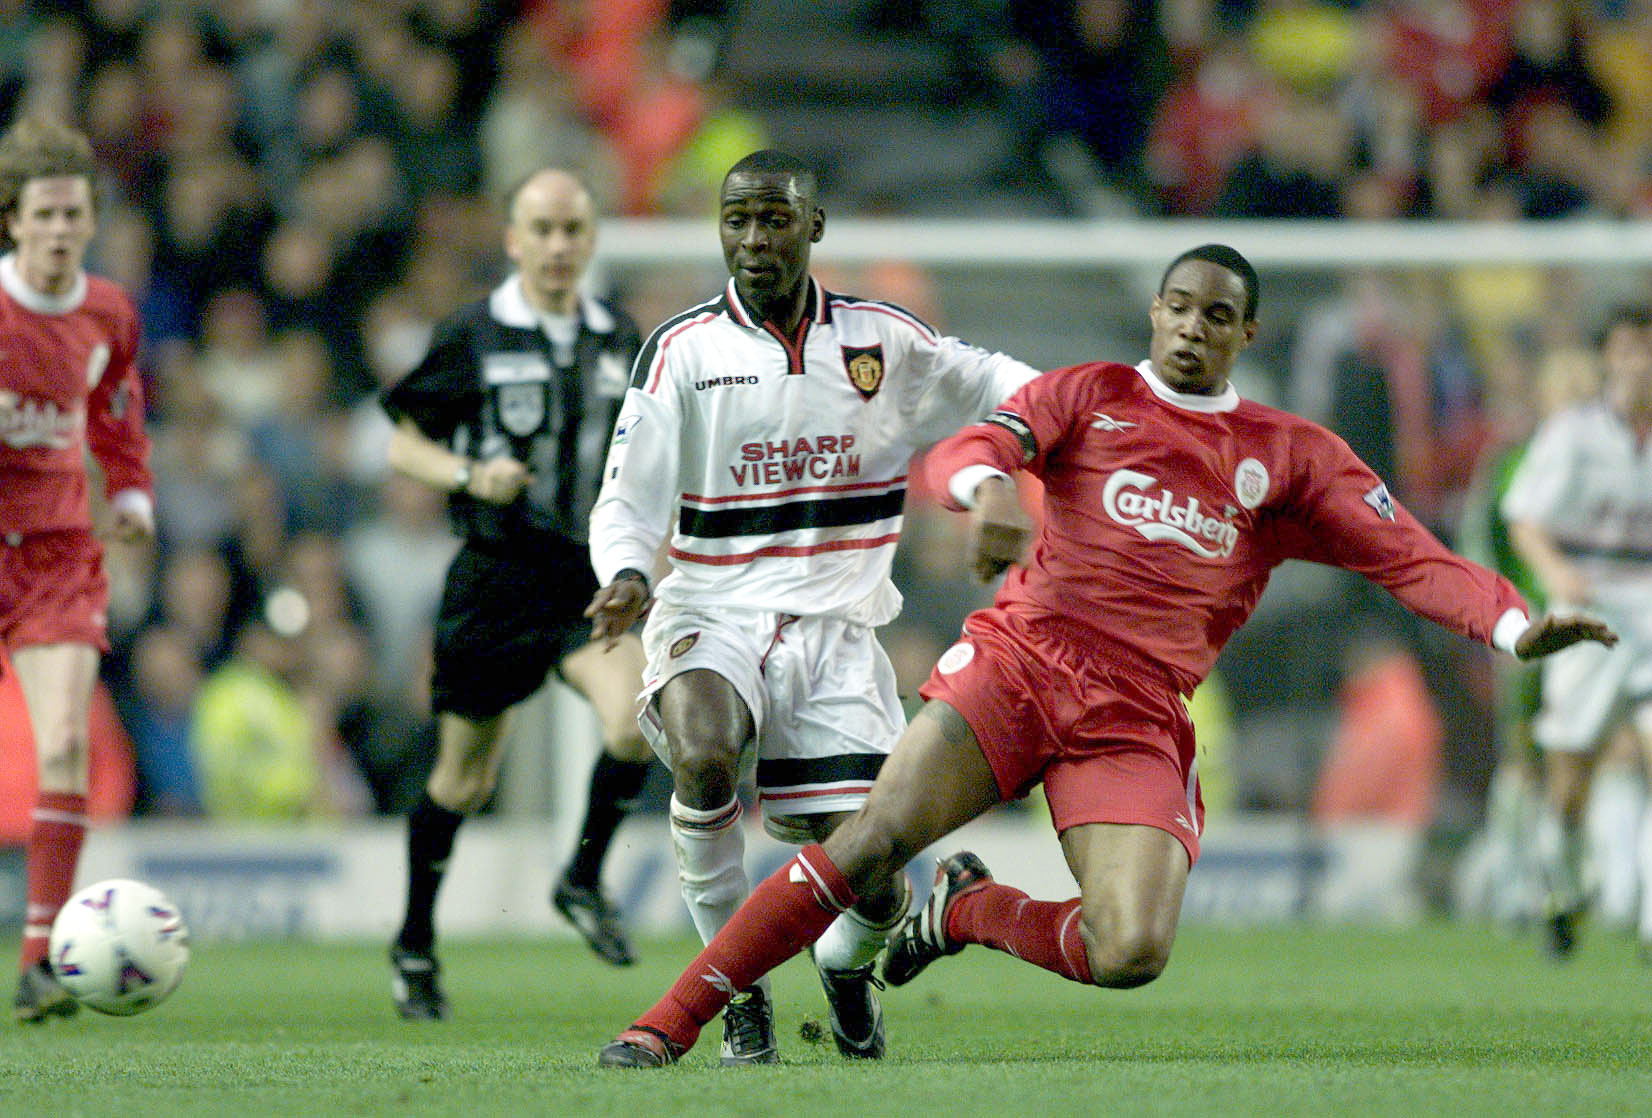 Paul Ince Liverpool v. Manchester United